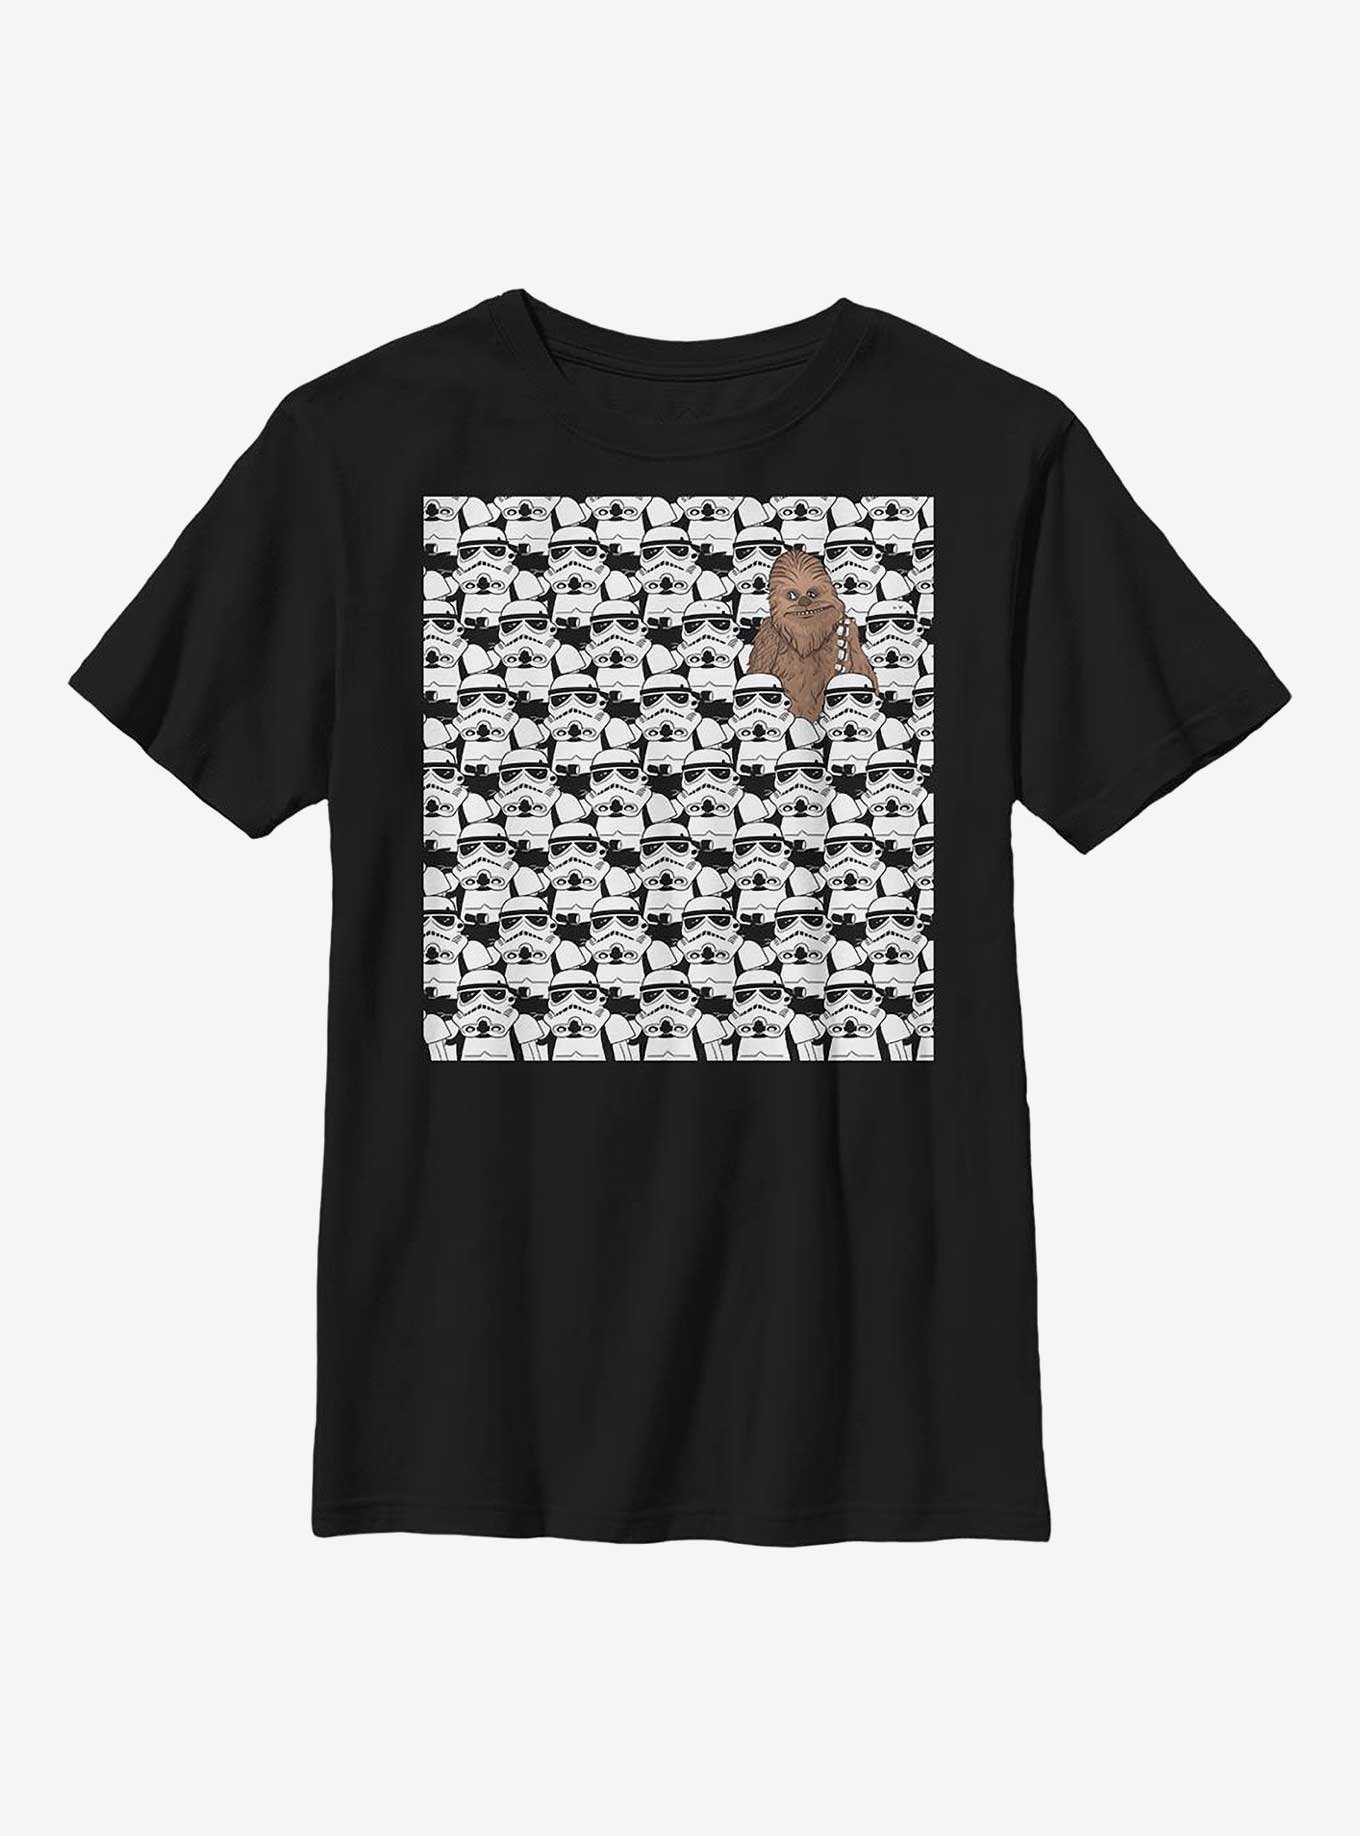 Star Wars Stormtrooper Chewbacca In Crowd Youth T-Shirt, , hi-res